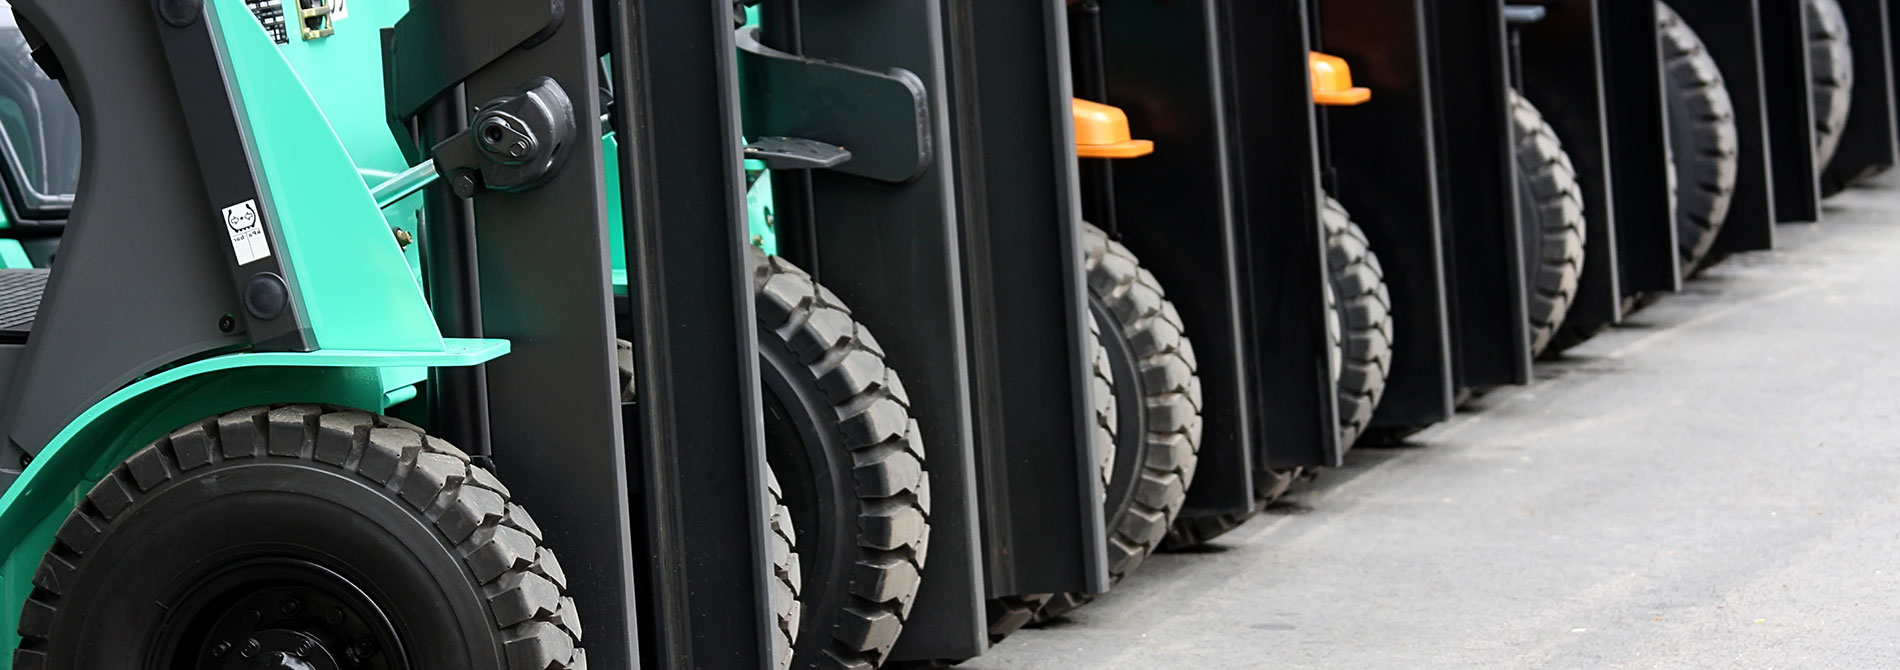 Switch from gas to electrically powered forklift trucks - Tuesday, 26.01.2021